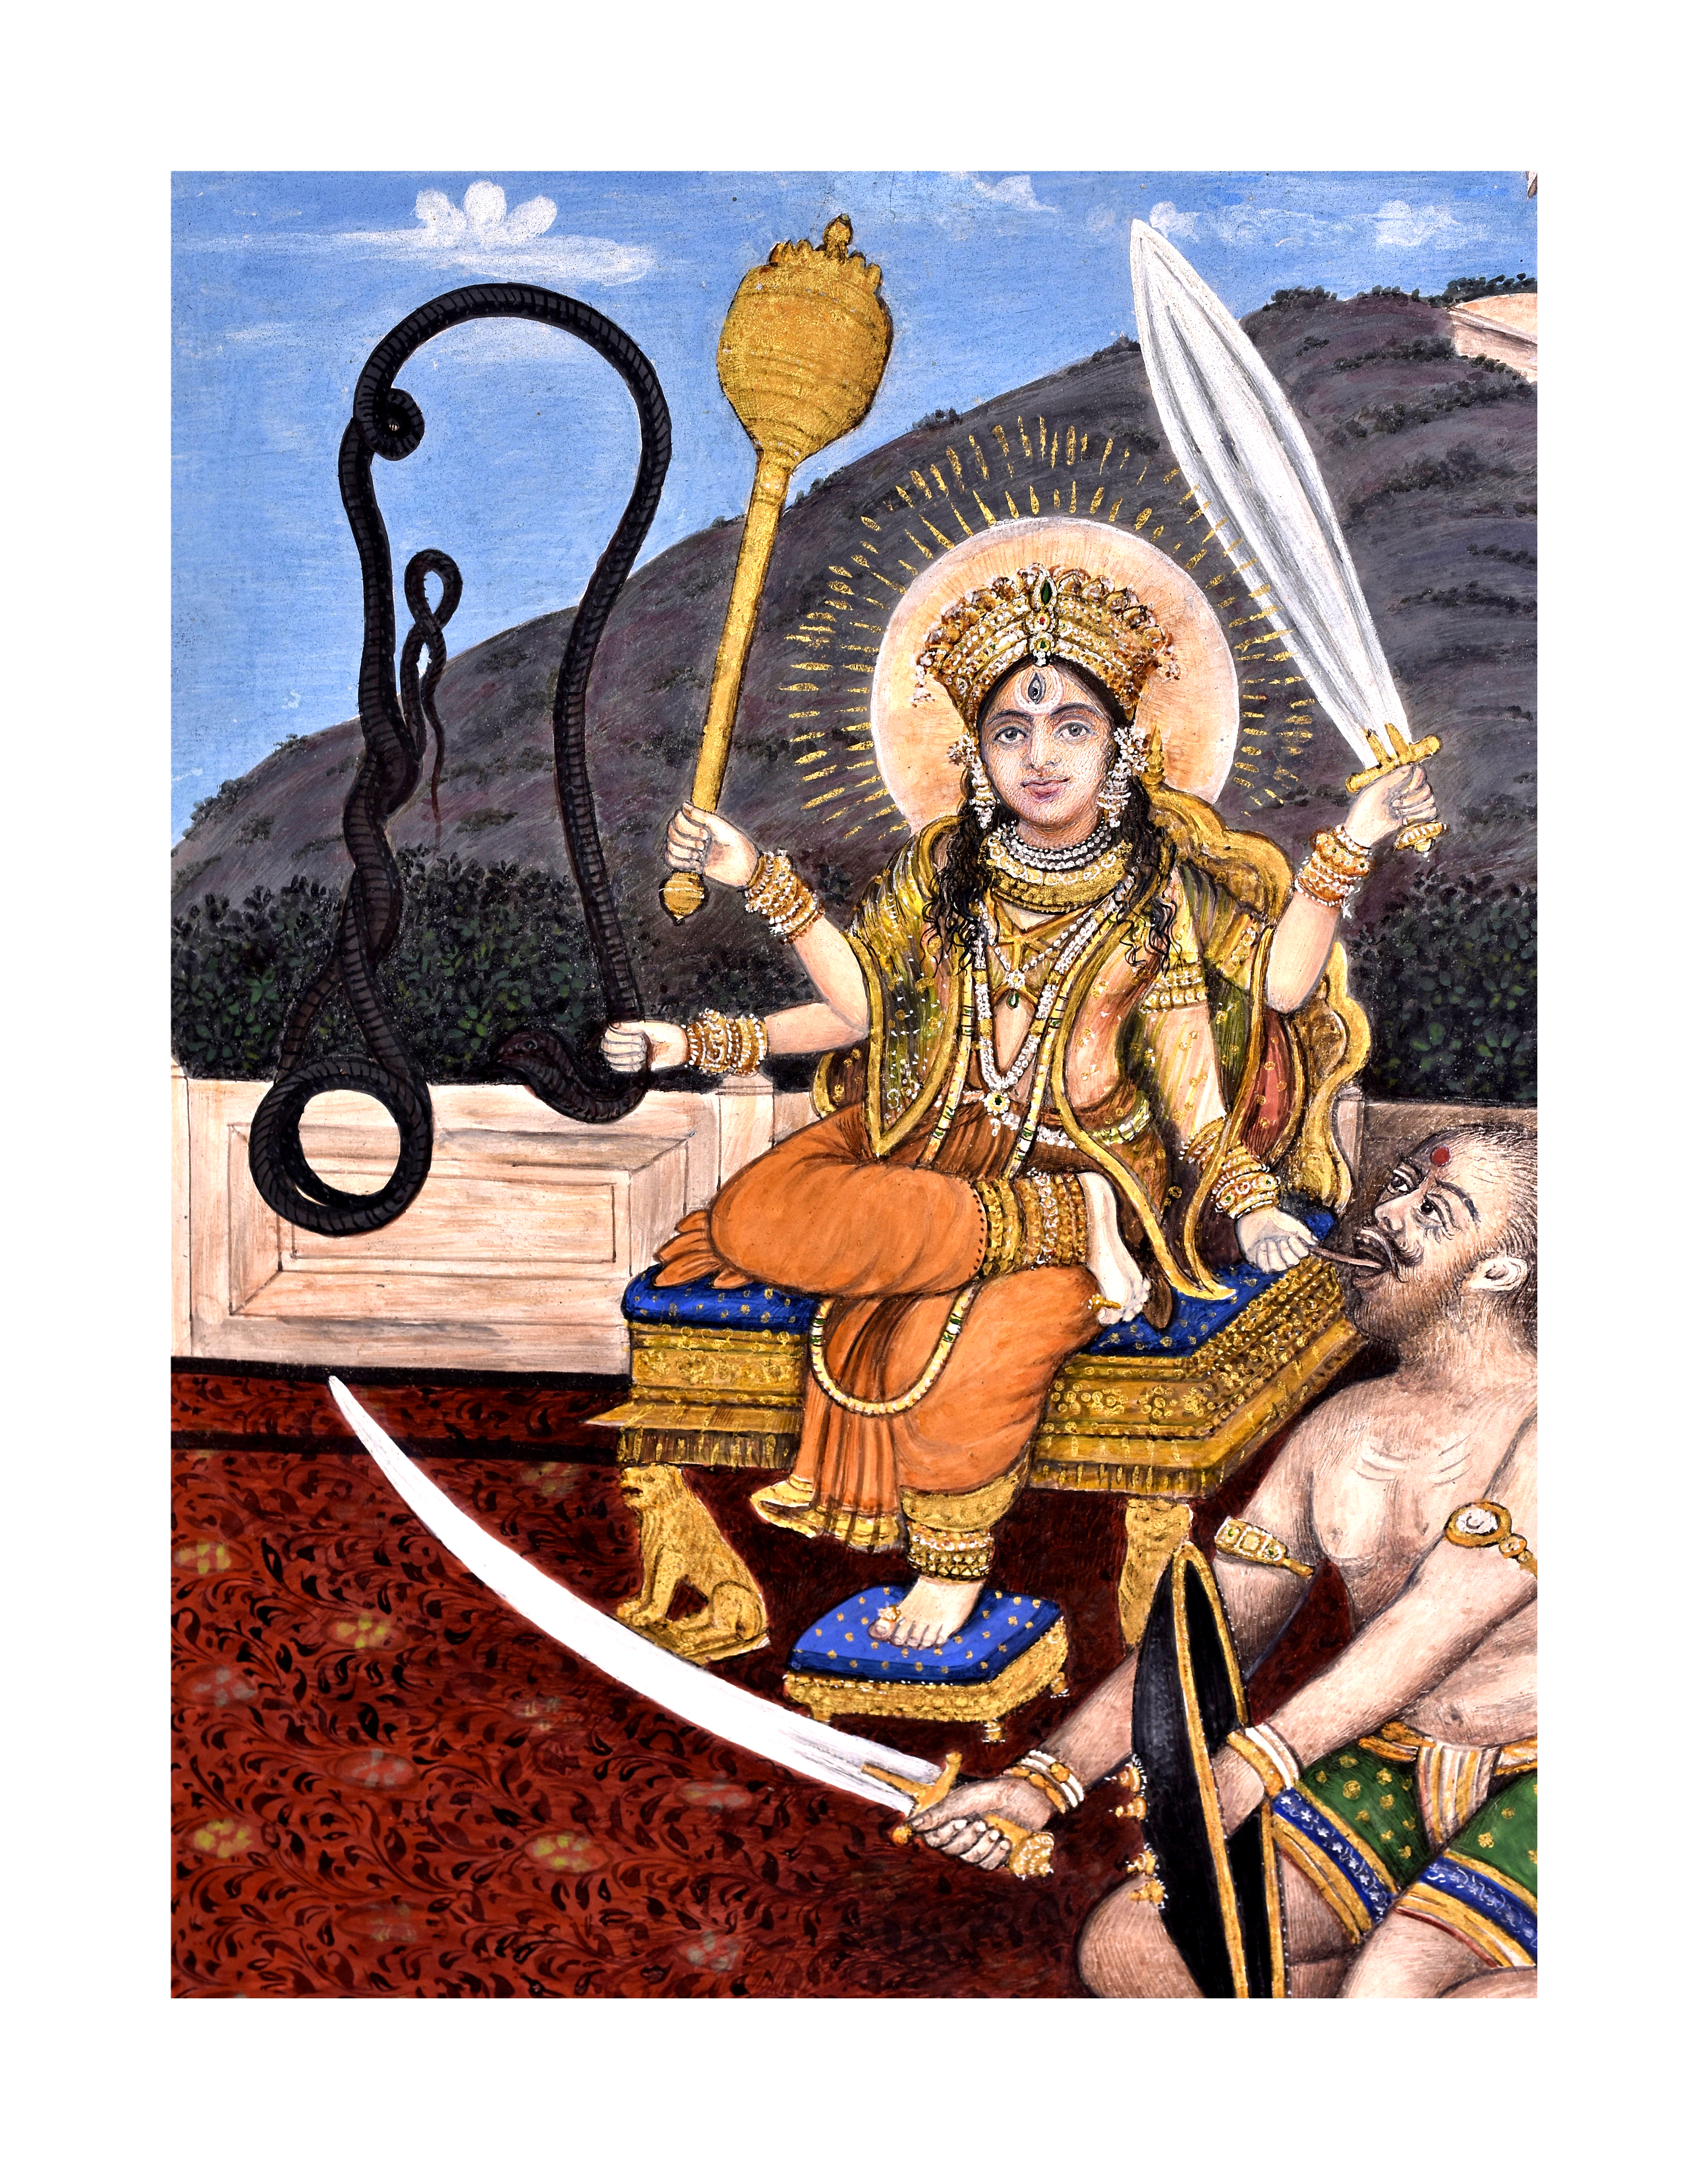 DEVU SEATED ON A GOLDEN THRONE WITH A SNAKE, KILLING A DEMON, ALWAR SCHOOL, 19TH CENTURY - Image 5 of 6